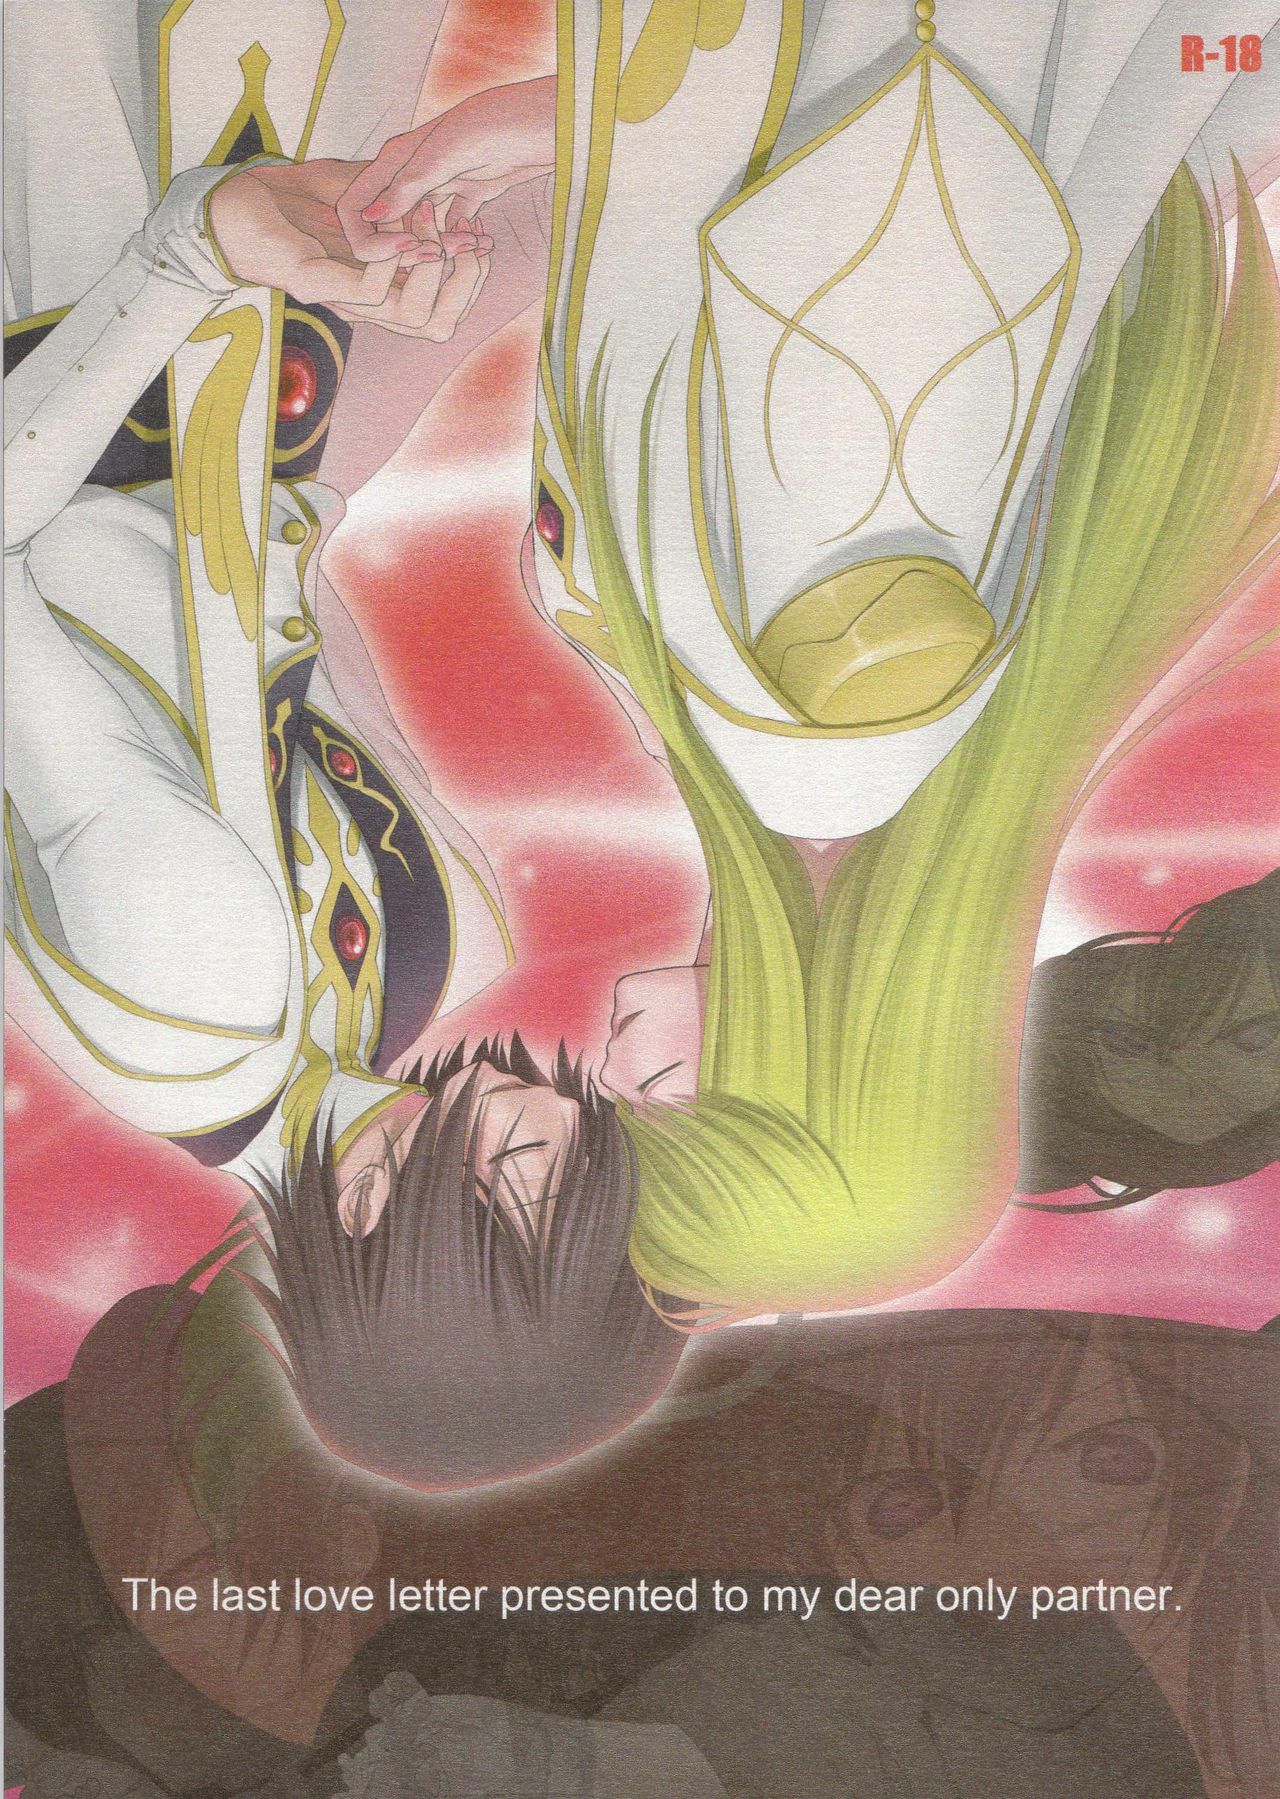 [APRICOT TEA] The last love letter presented to my dear only partner. (Code Geass) page 1 full